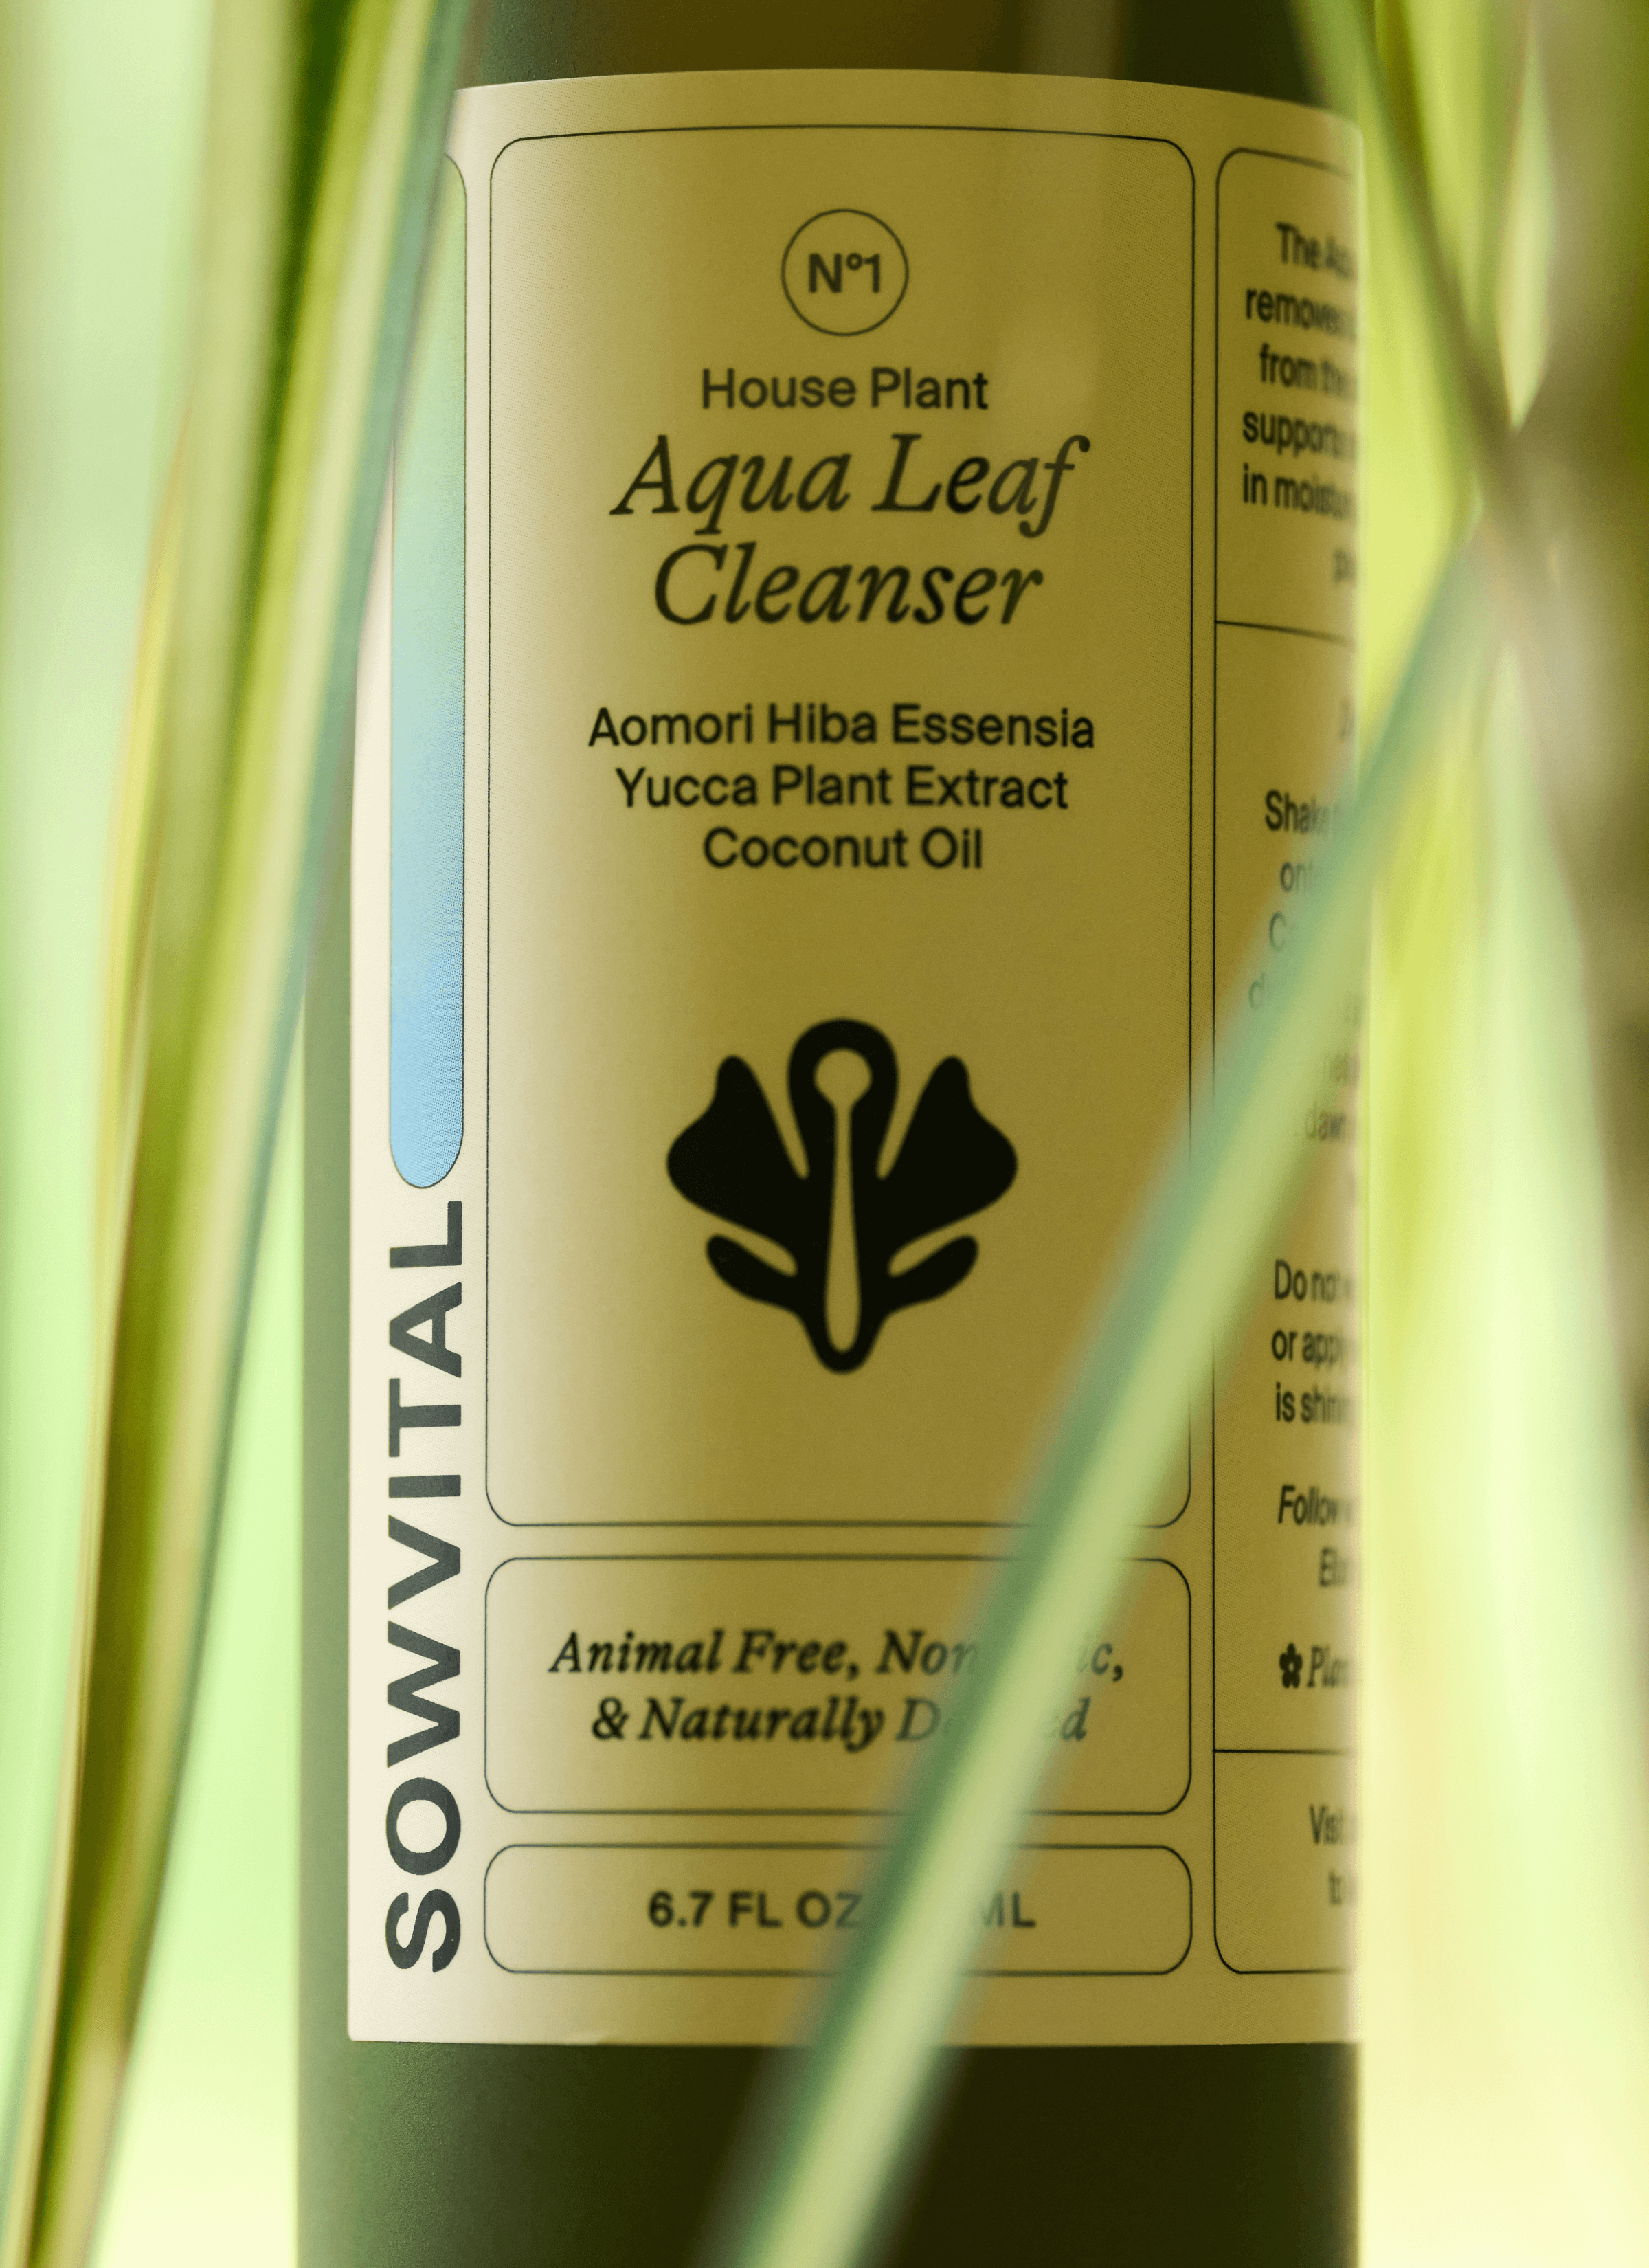 Sowvital product - Aqua leaf cleanser photoshoot with some leaves.